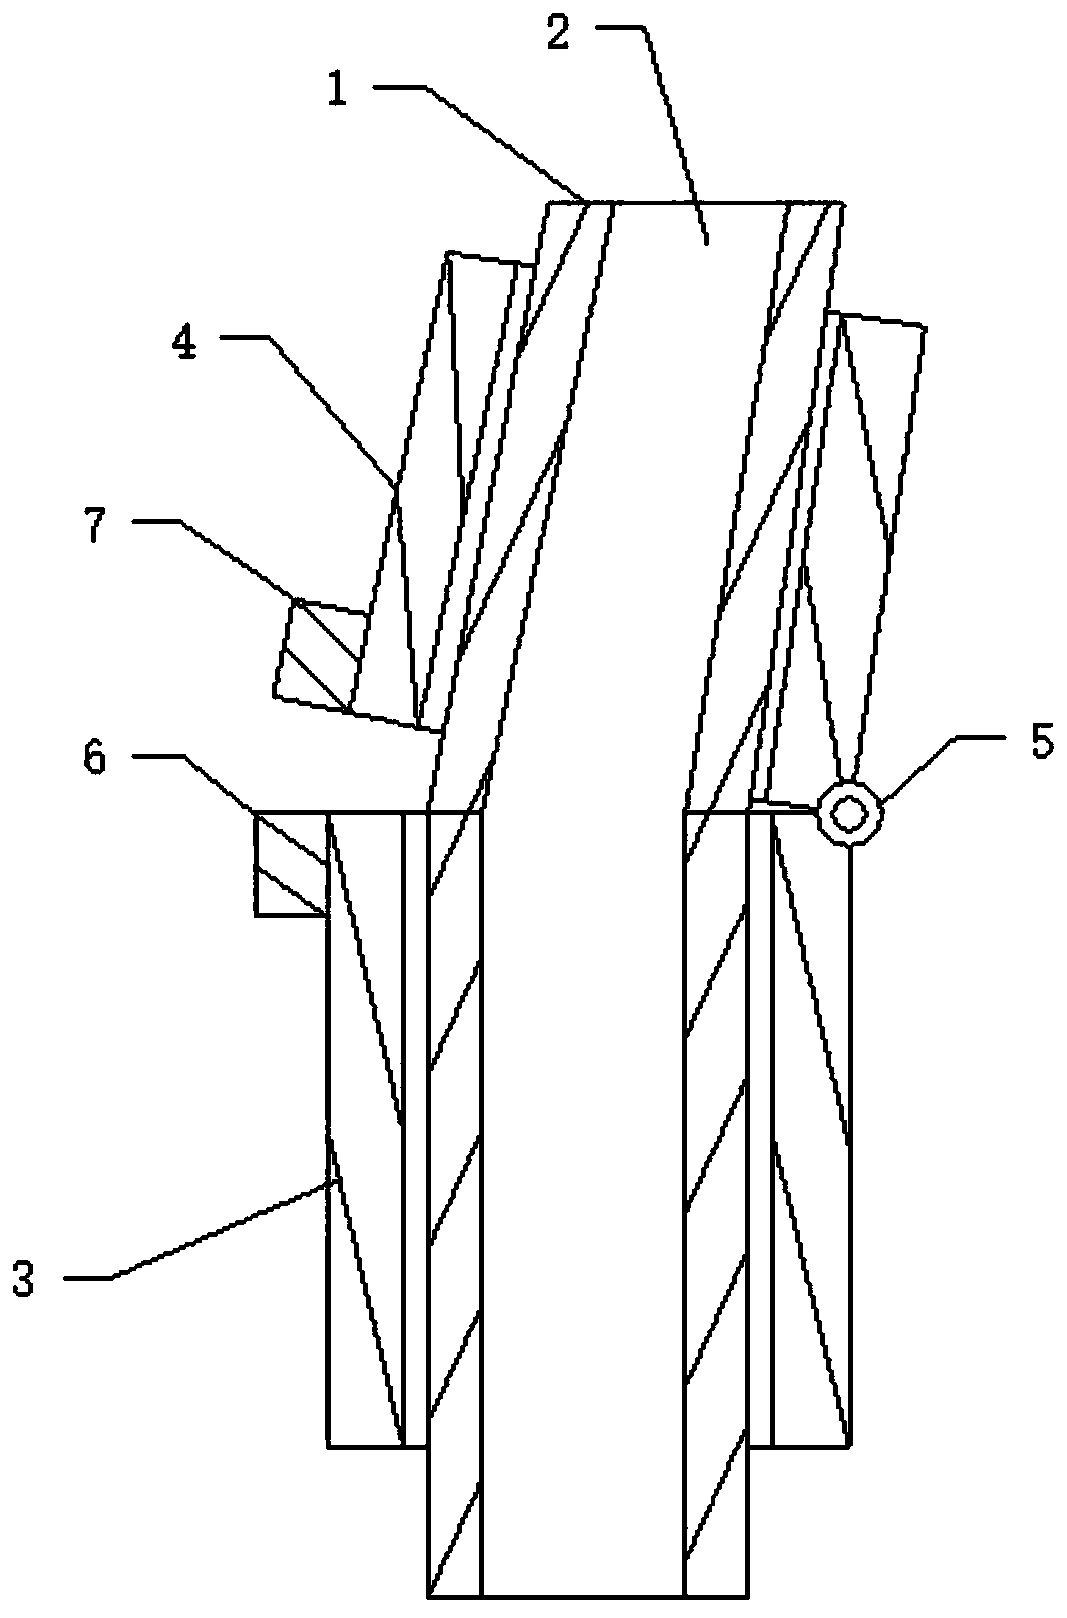 A bending correction device for utility poles